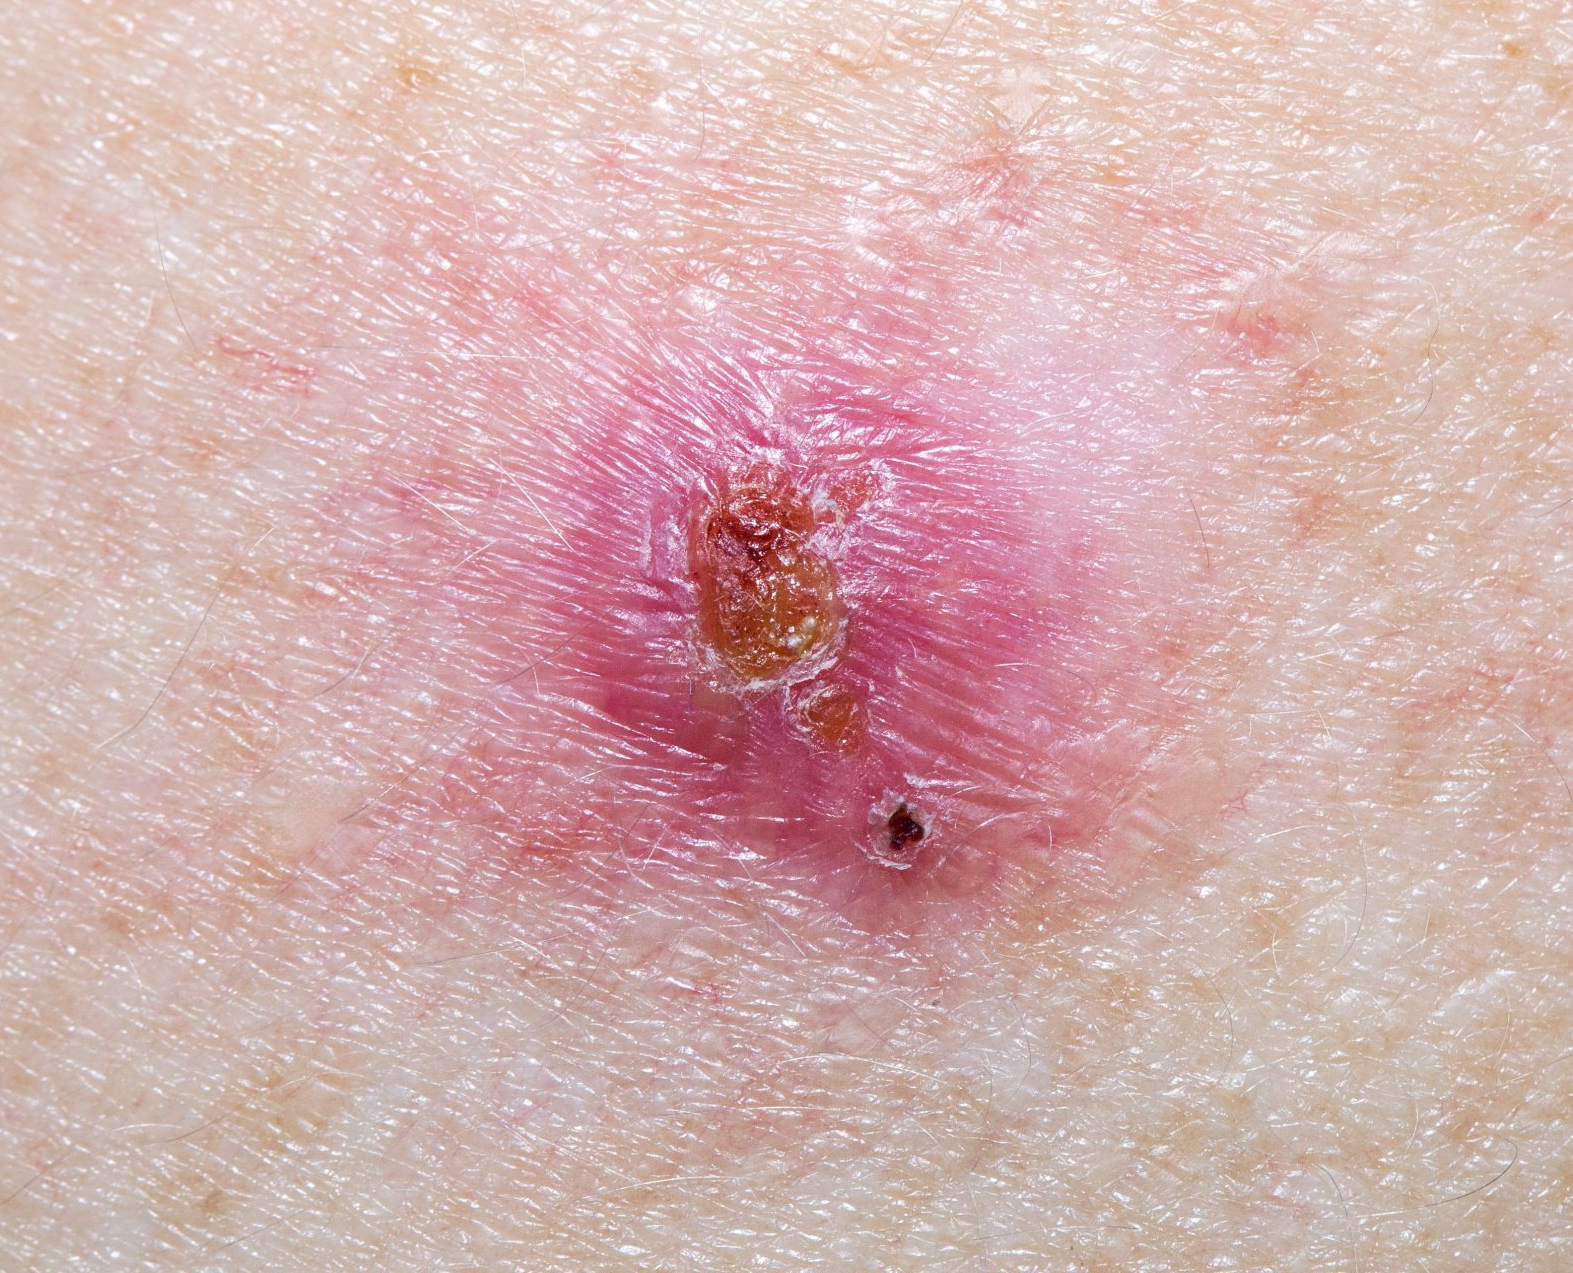 basal cell carcinoma scaly spot